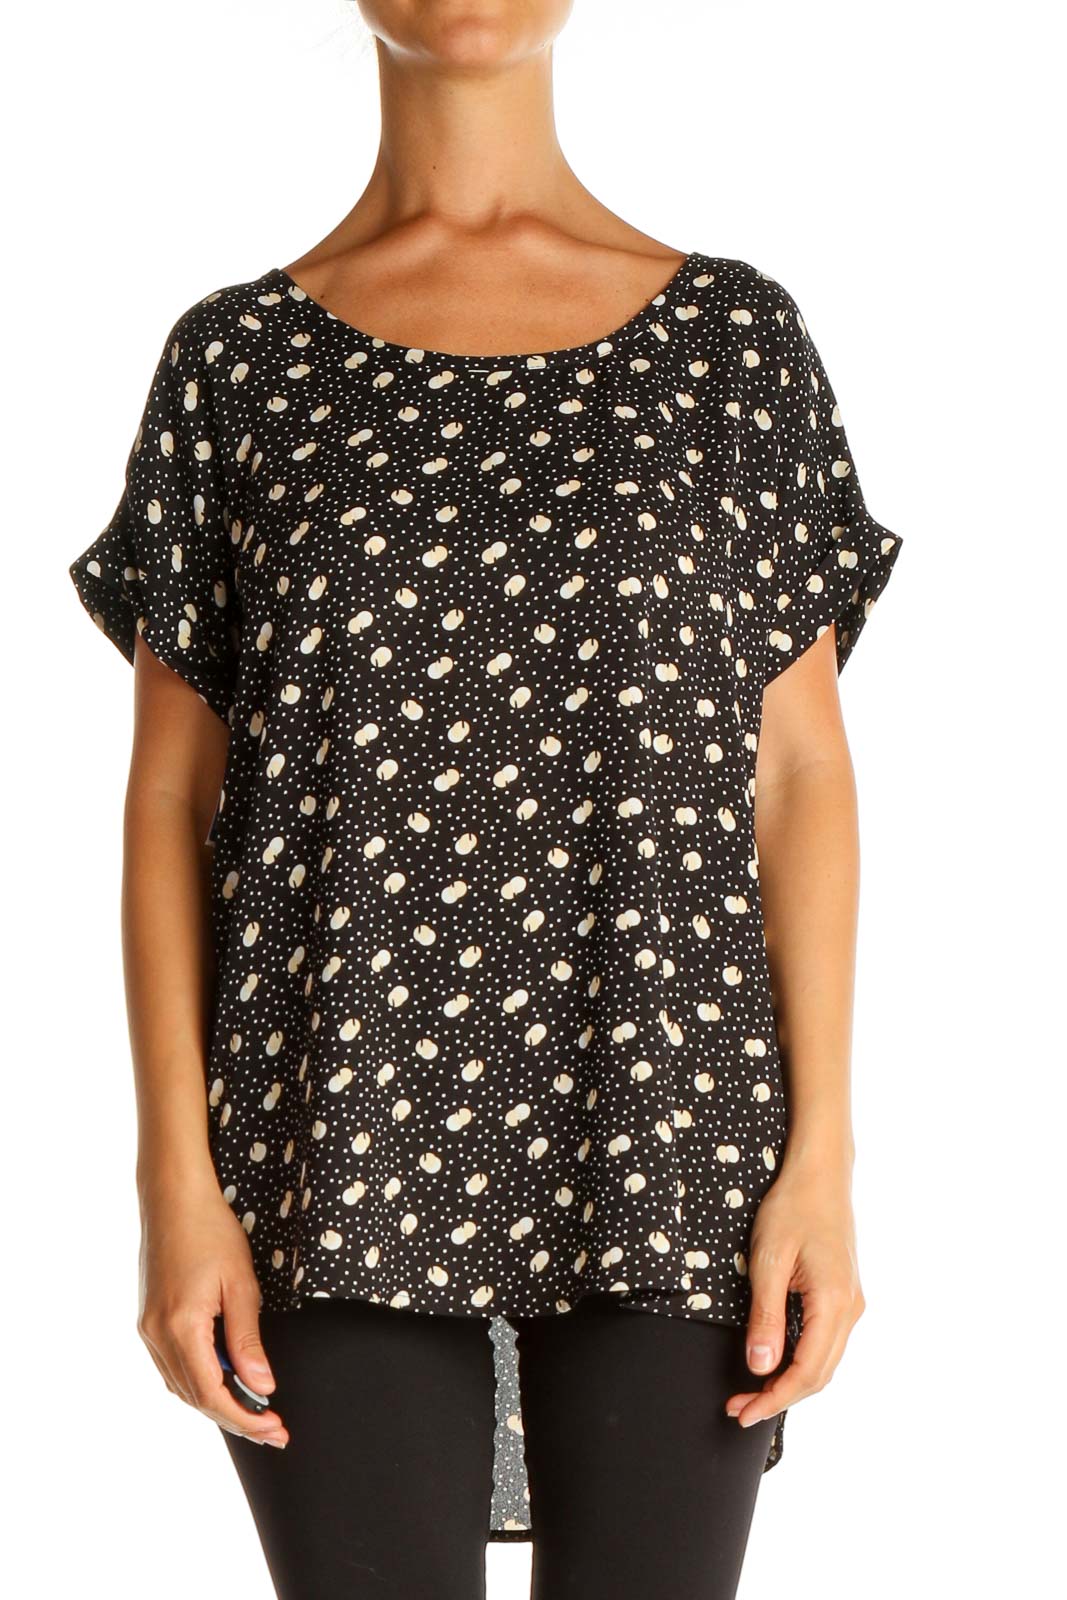 Black Printed Casual Blouse Front